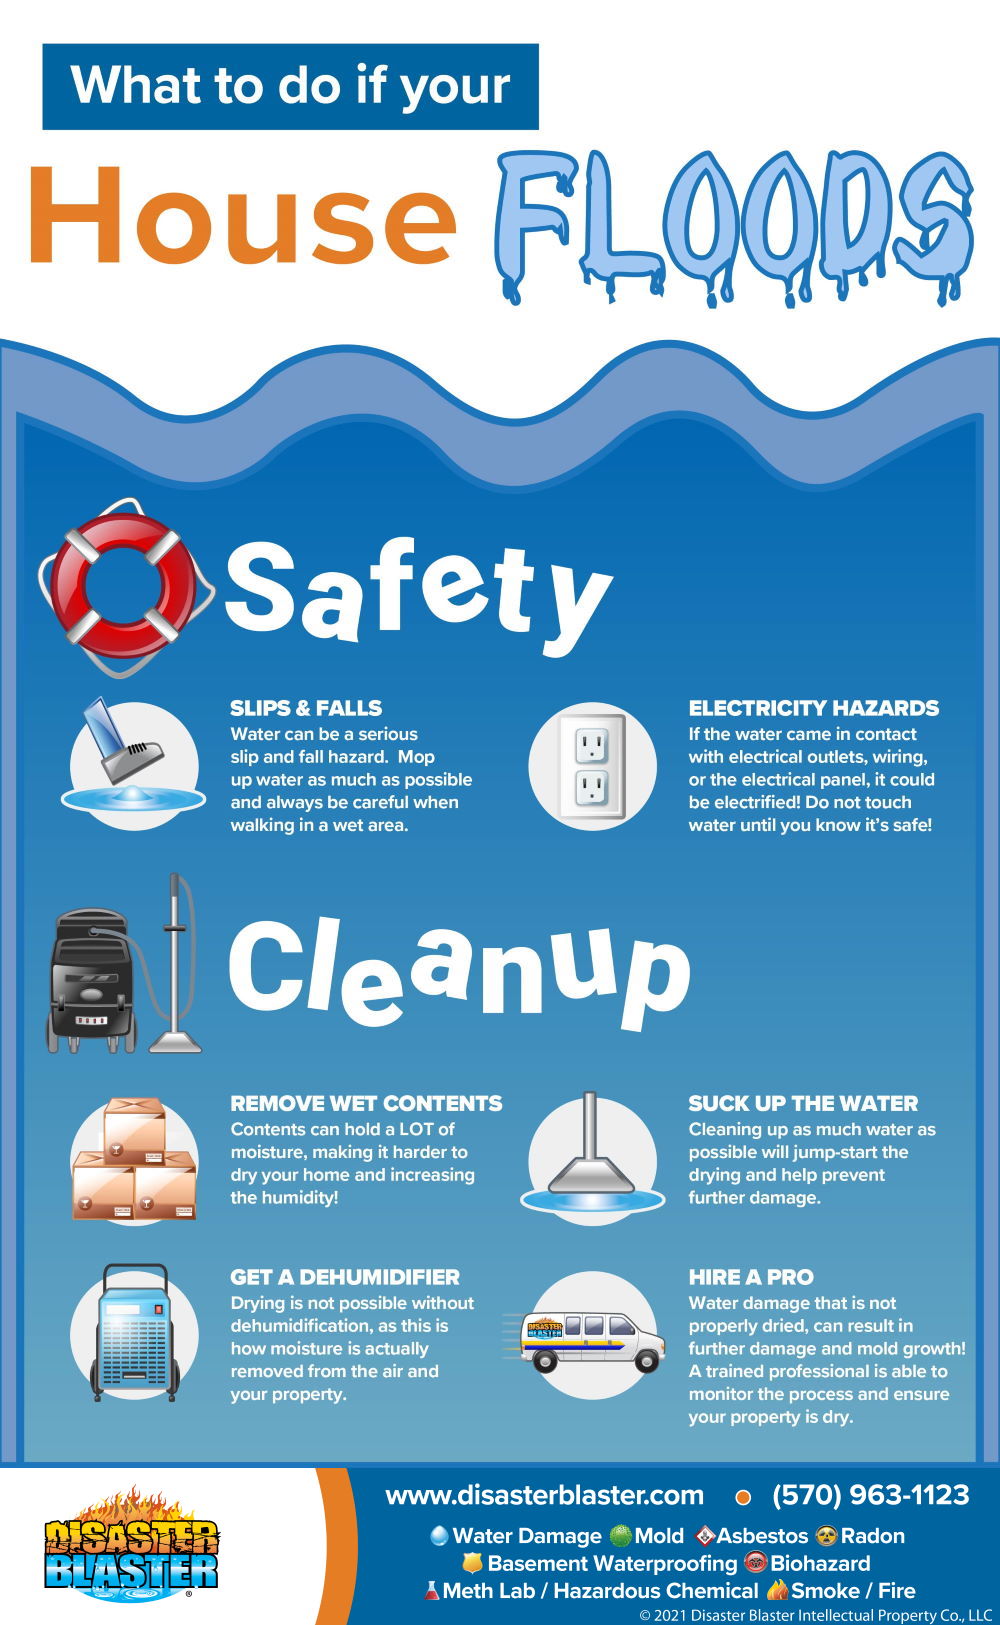 What to do if your house floods infographic